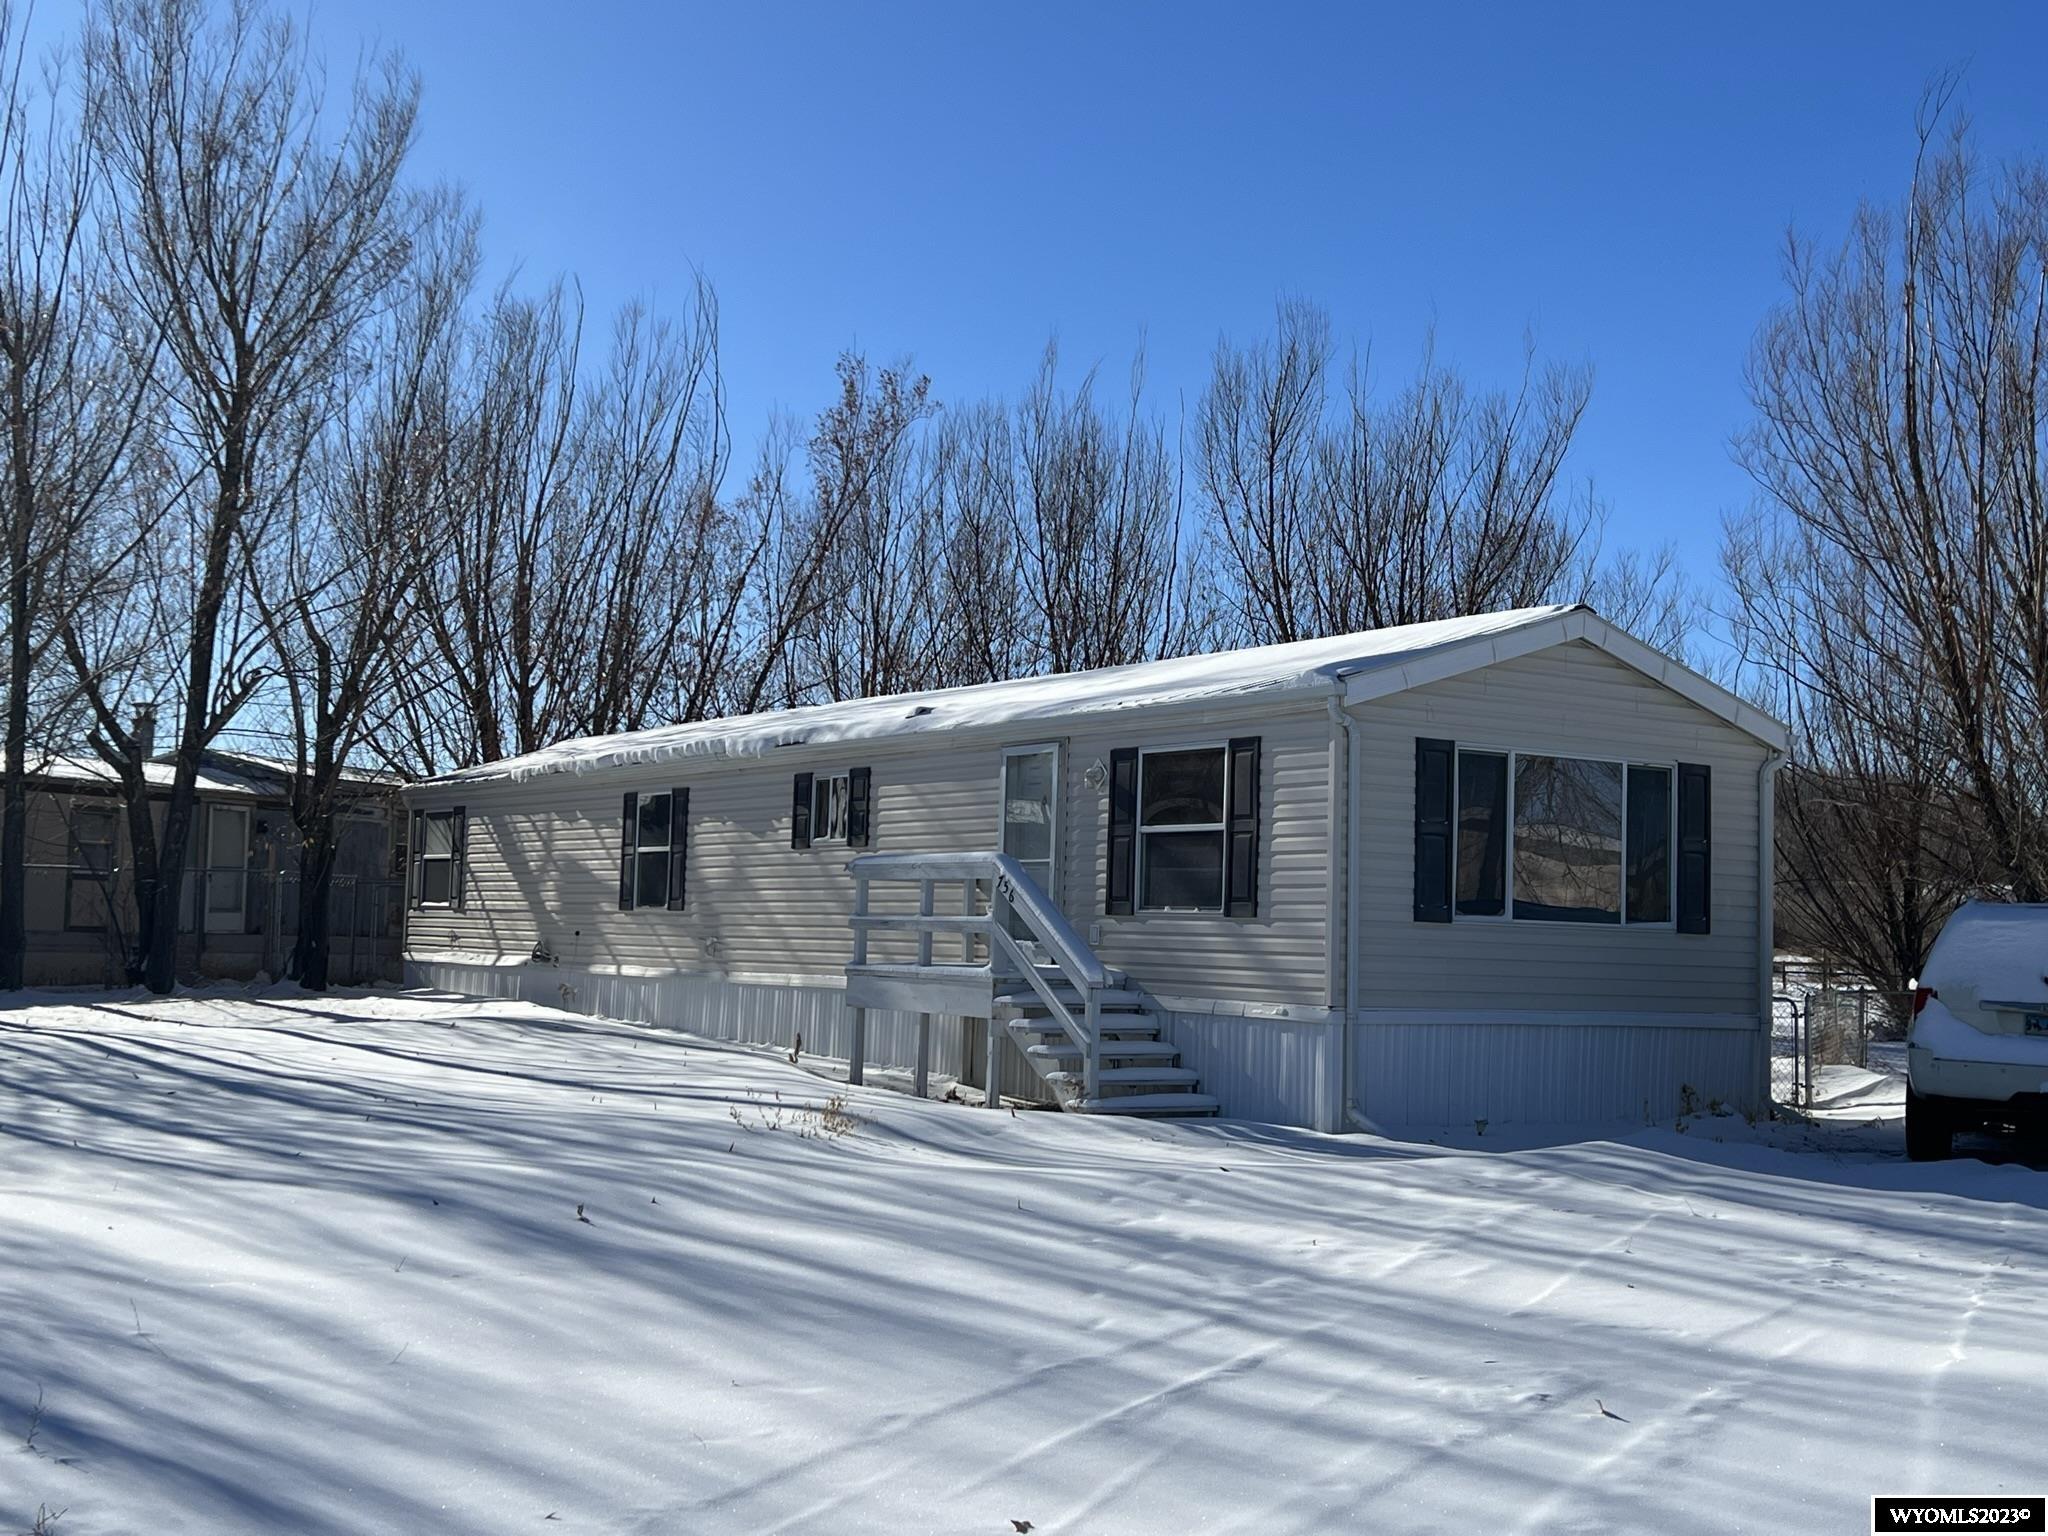 2002 2-bedroom manufactured home on a lovely lot in Basin, WY.  Open concept living room and kitchen area with lots of windows.  Primary bedroom has walk-in closet offering extra storage space.  Additional features include central air, metal roof, storage shed, and plenty of parking.  Don't wait on this great value!